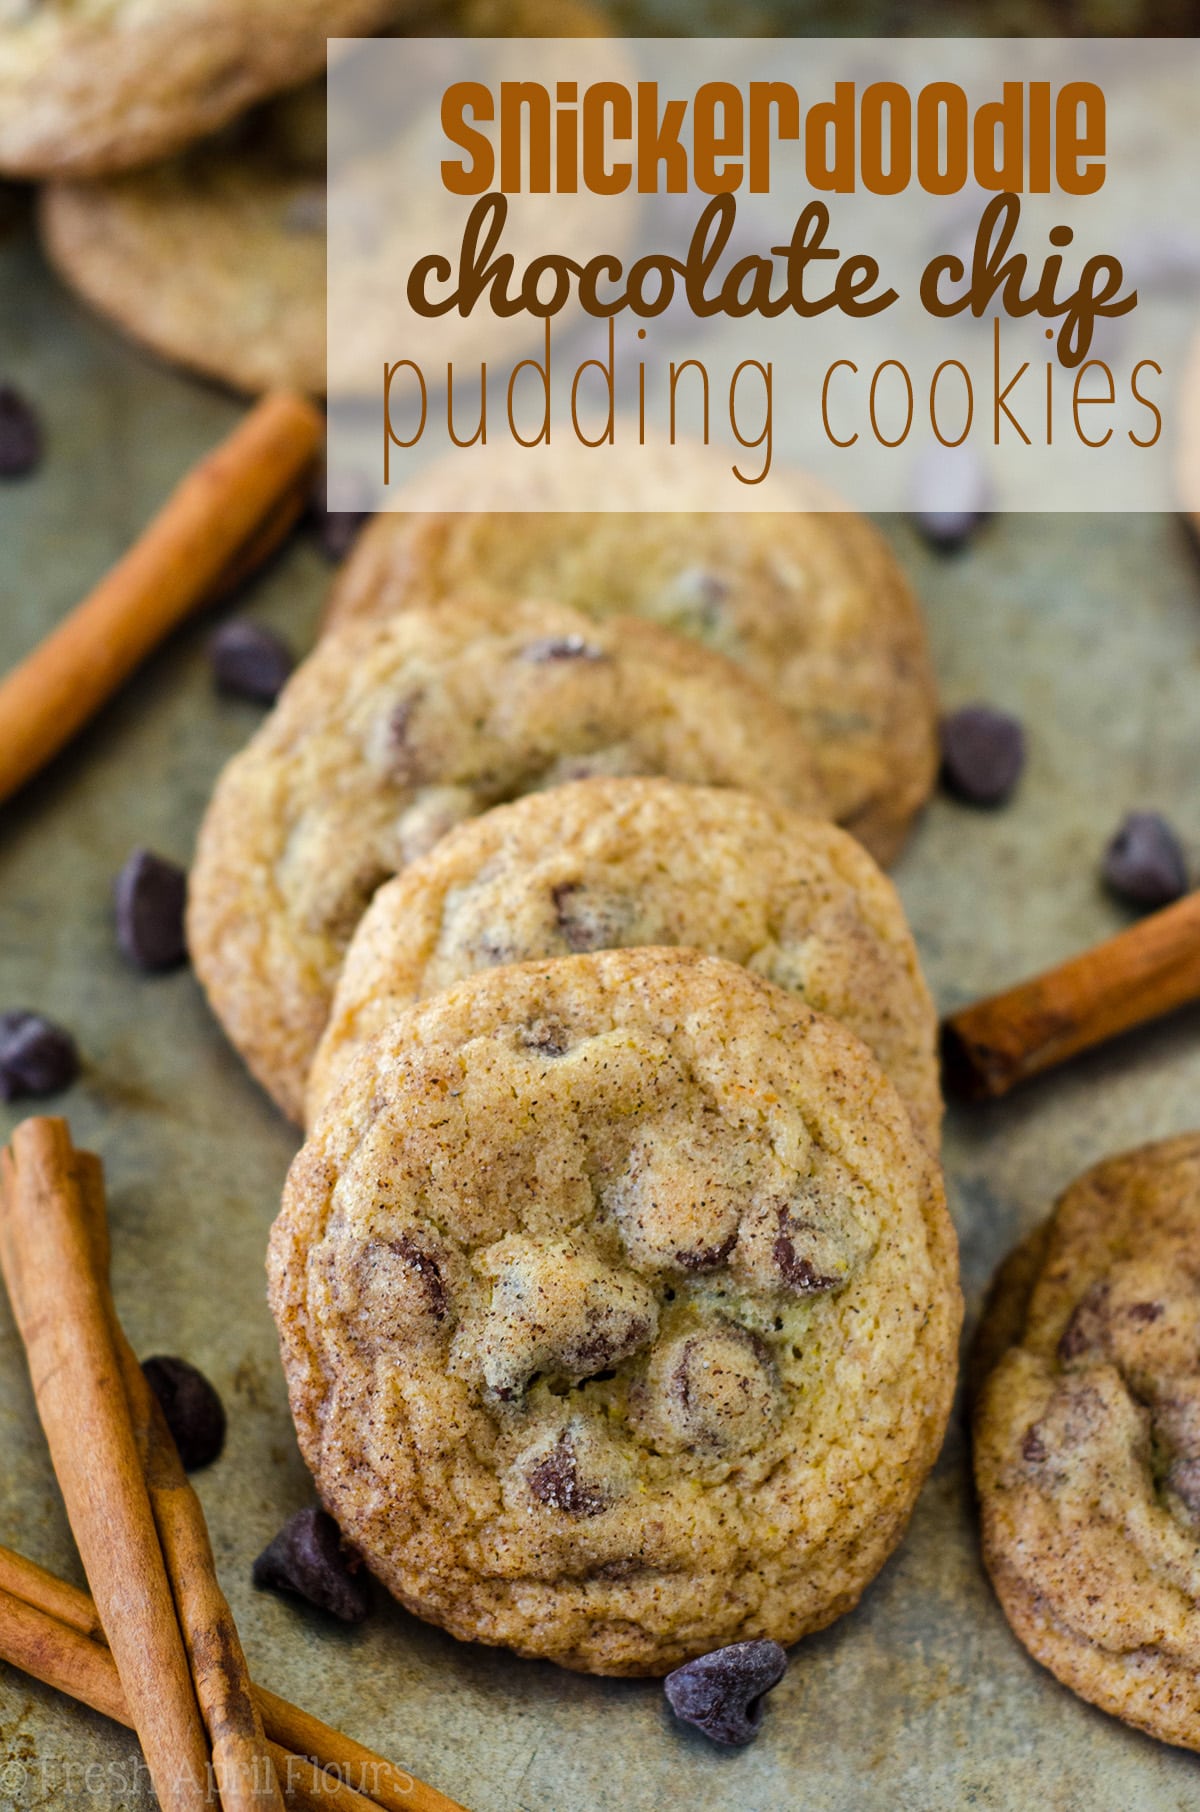 Snickerdoodle Chocolate Chip Pudding Cookies: Soft and chewy pudding cookies filled with chocolate chips with a generous cinnamon-sugar coating. via @frshaprilflours